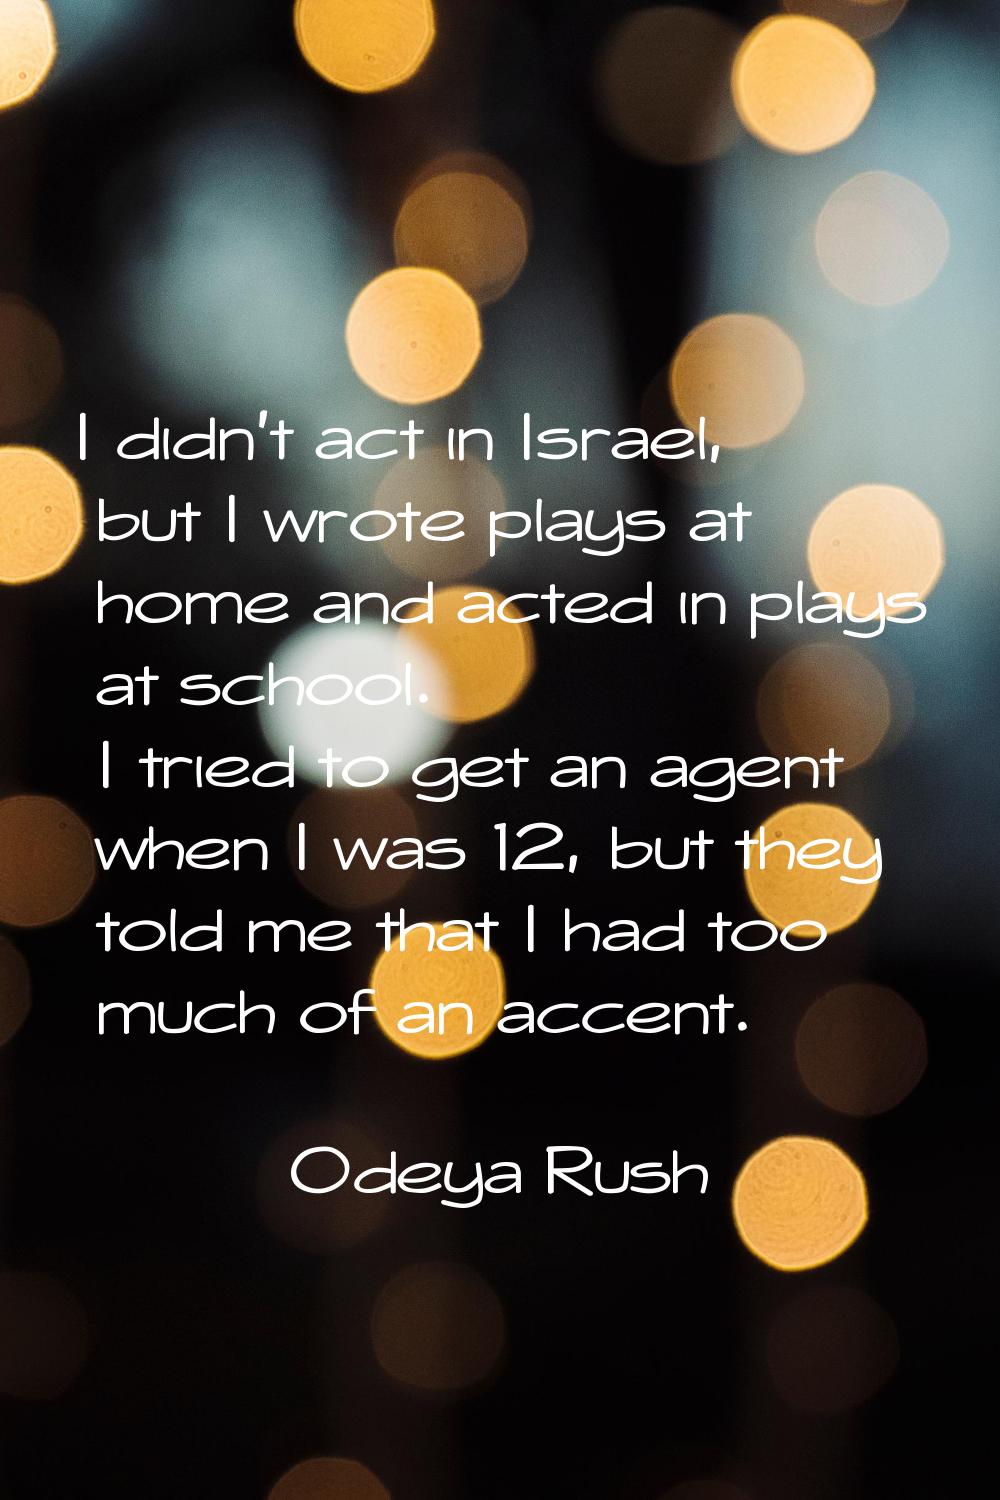 I didn't act in Israel, but I wrote plays at home and acted in plays at school. I tried to get an a